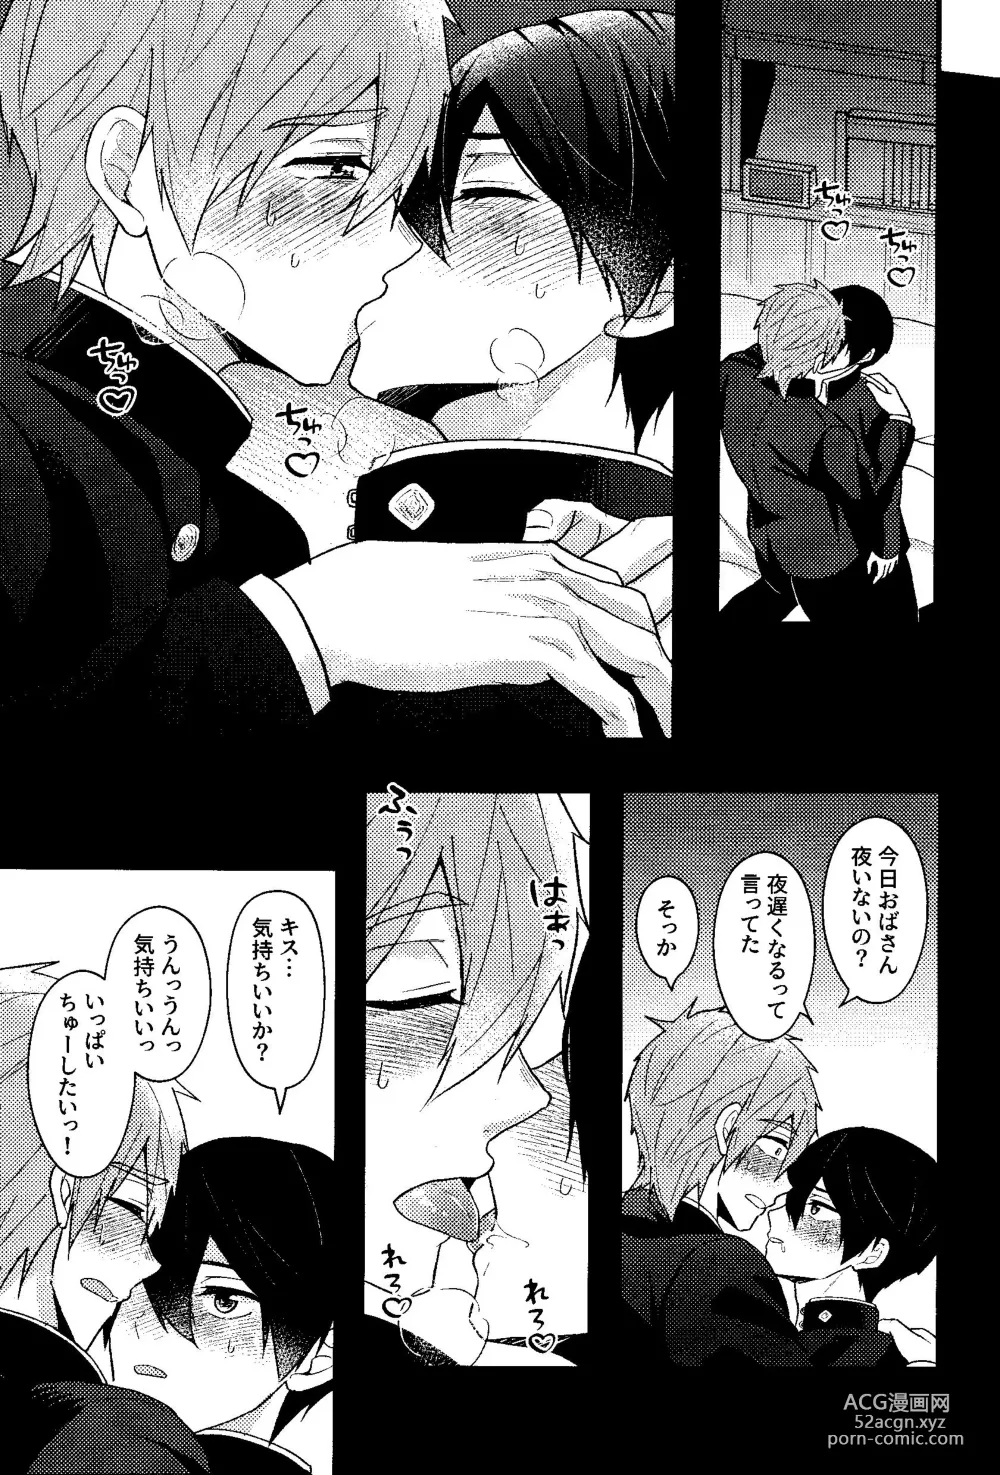 Page 23 of doujinshi My everything